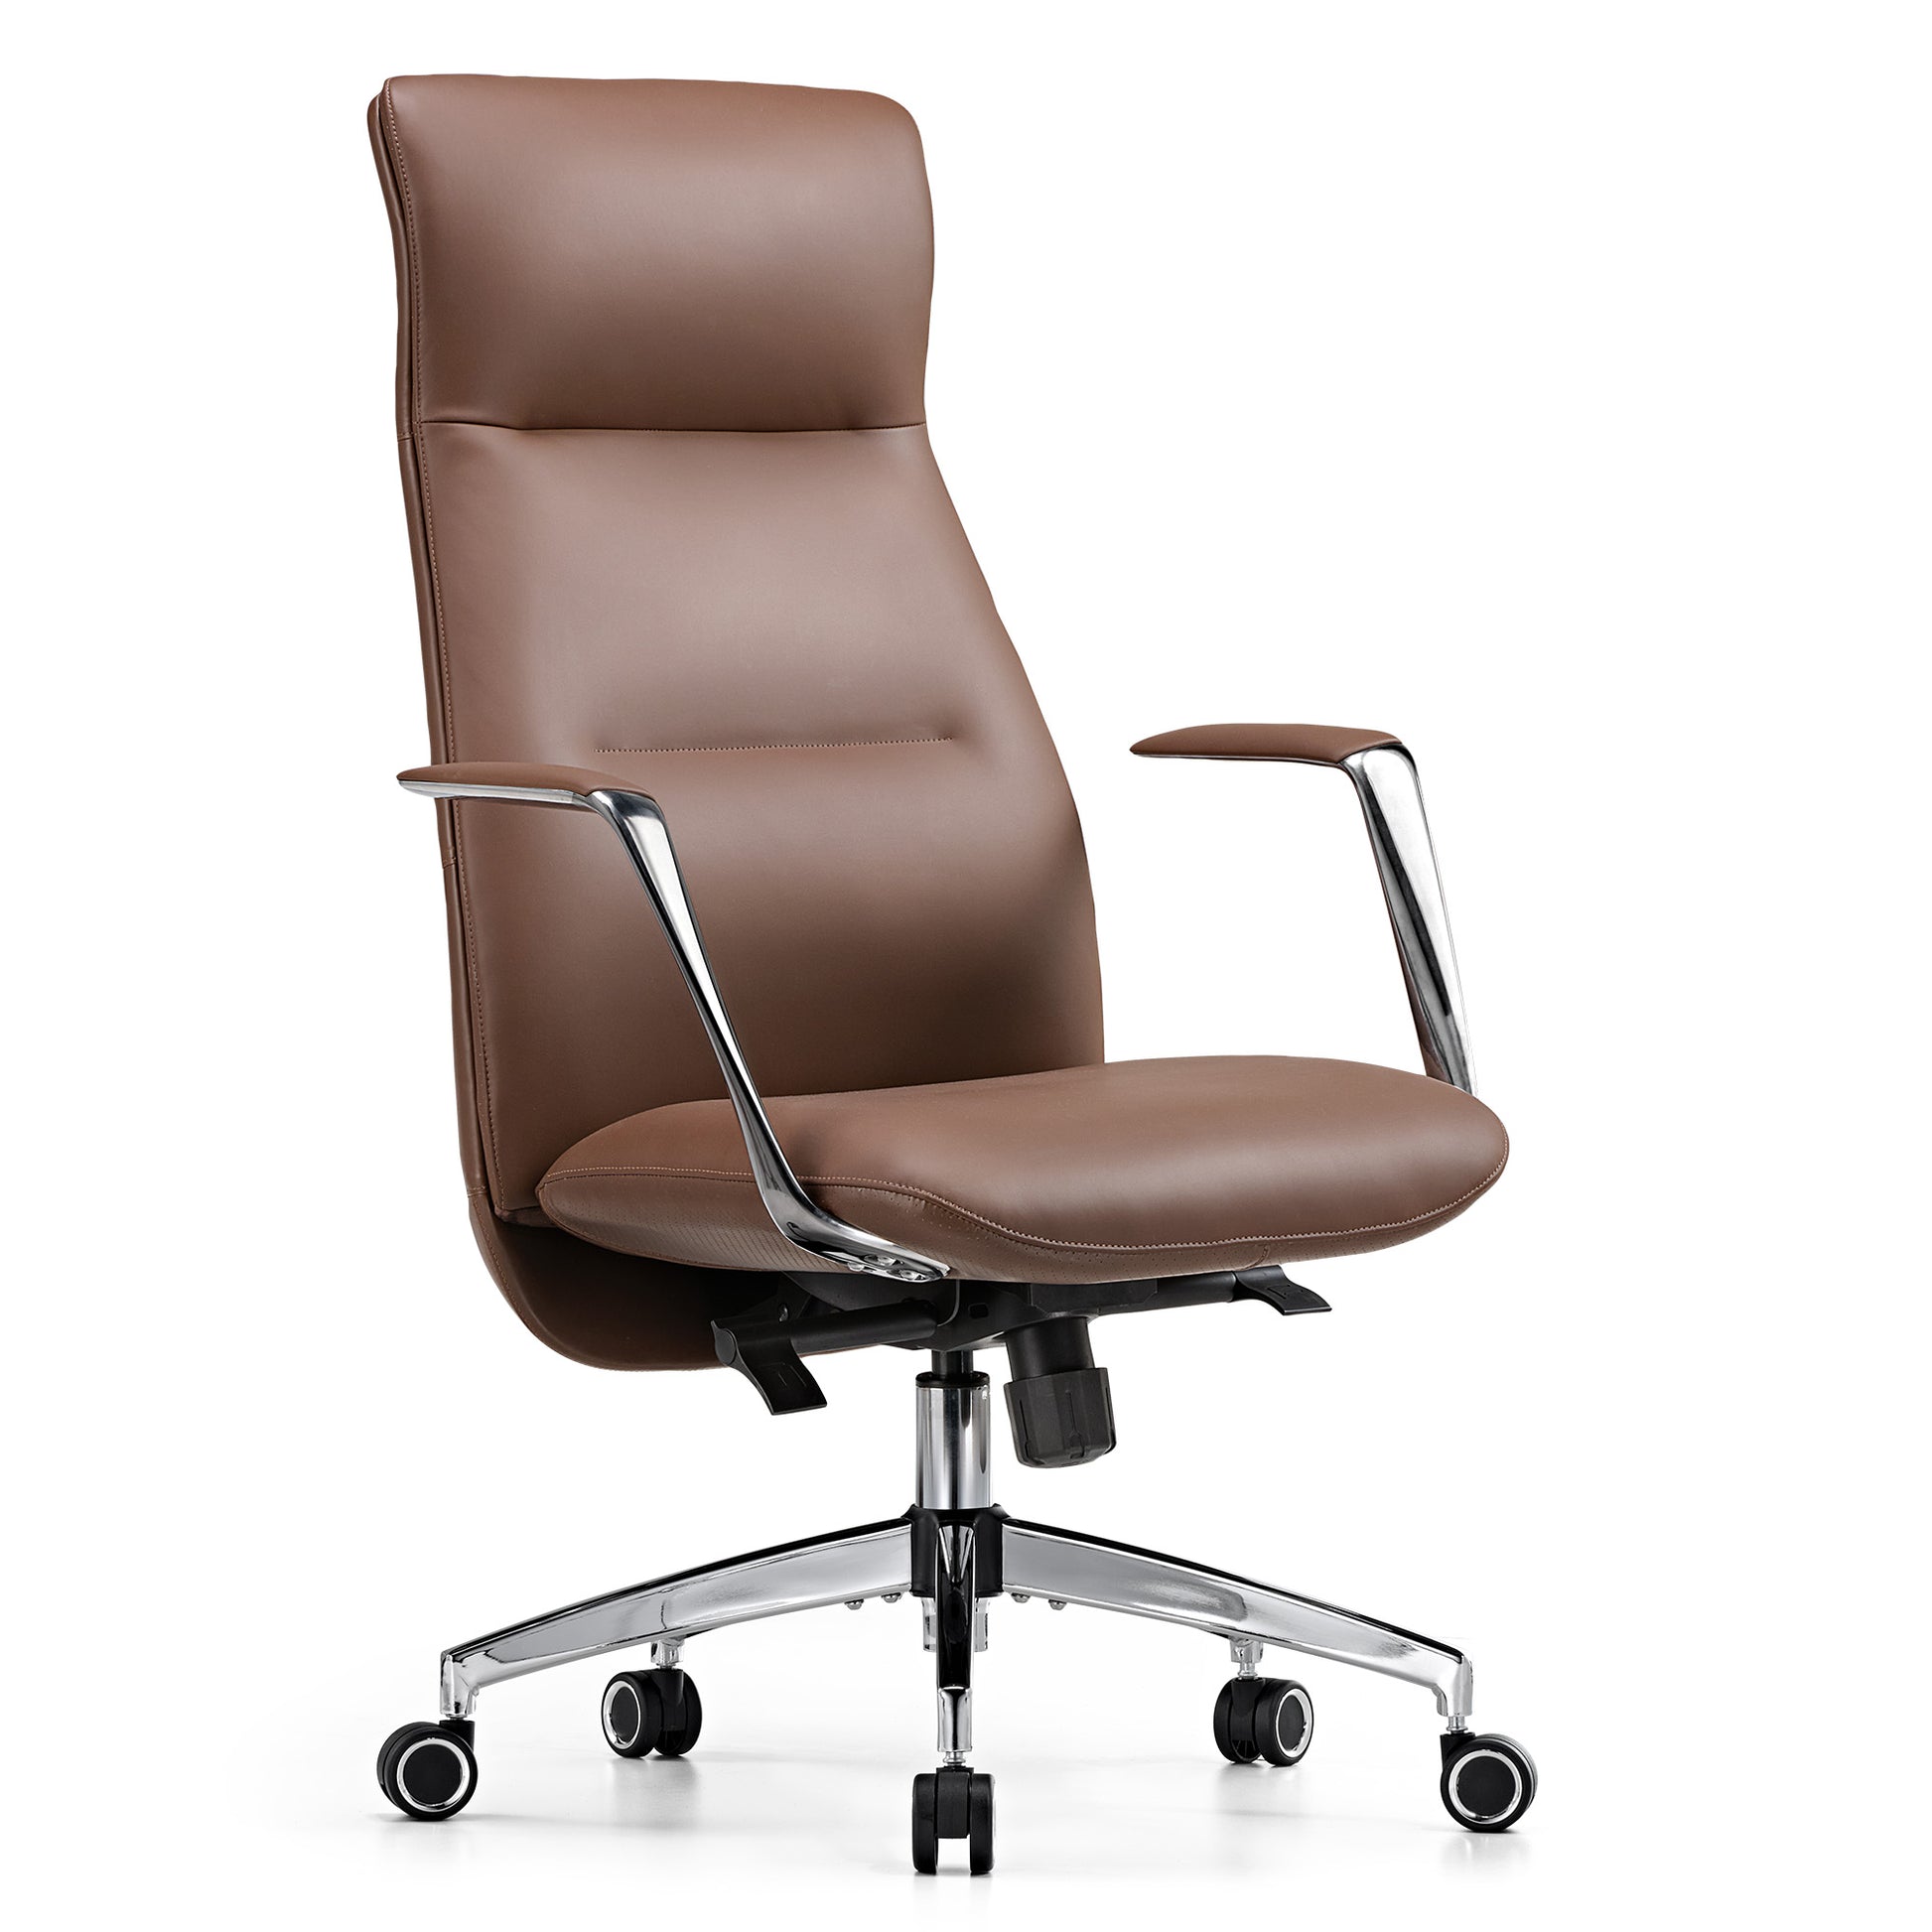 Royal Slim OC08 Leather High Back Executive Office Chair, Brown High End Office